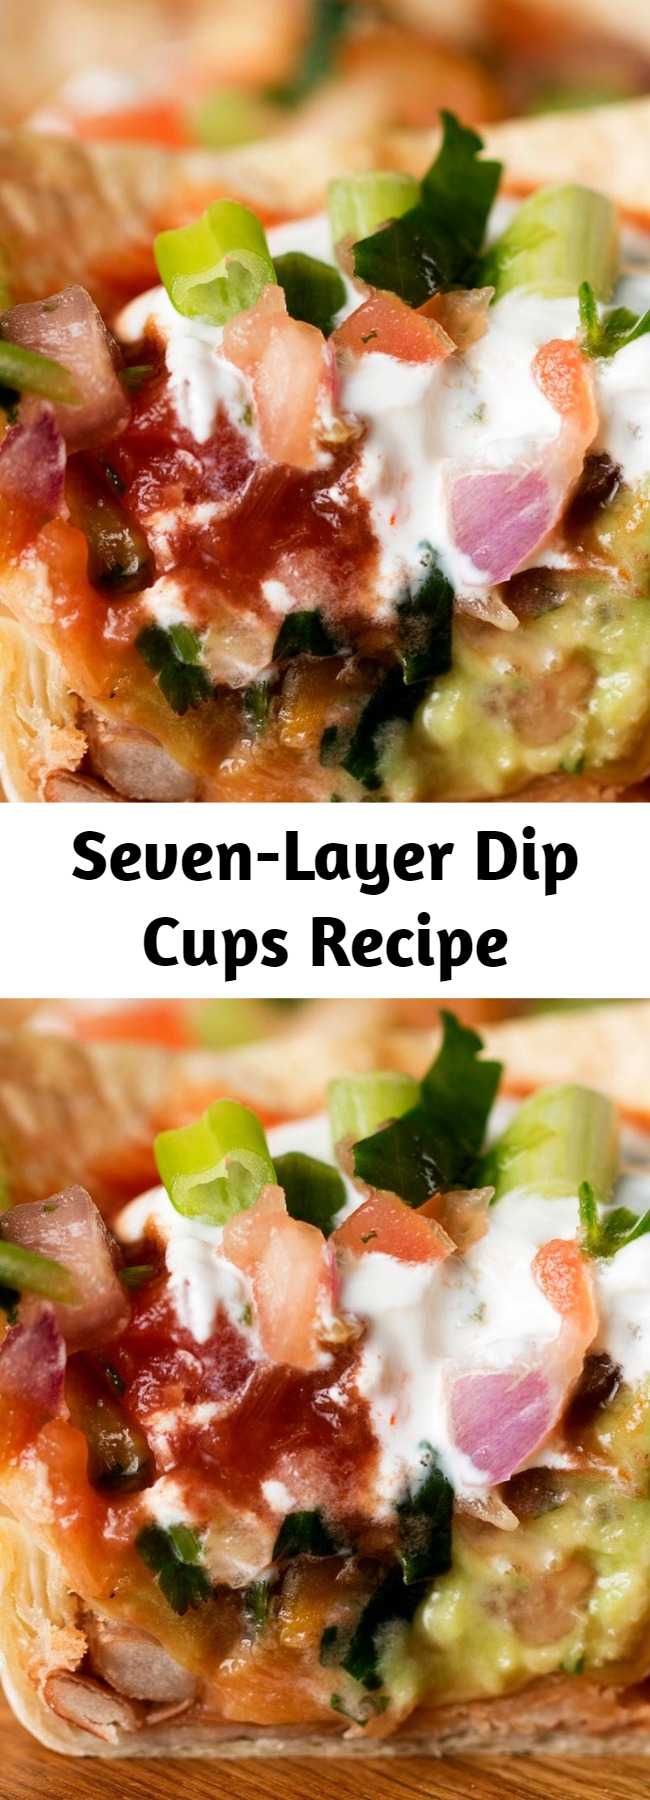 Seven-Layer Dip Cups Recipe - These recipe is amazing!!! The whole family loves them. Really fast, easy, and tasty snacks.